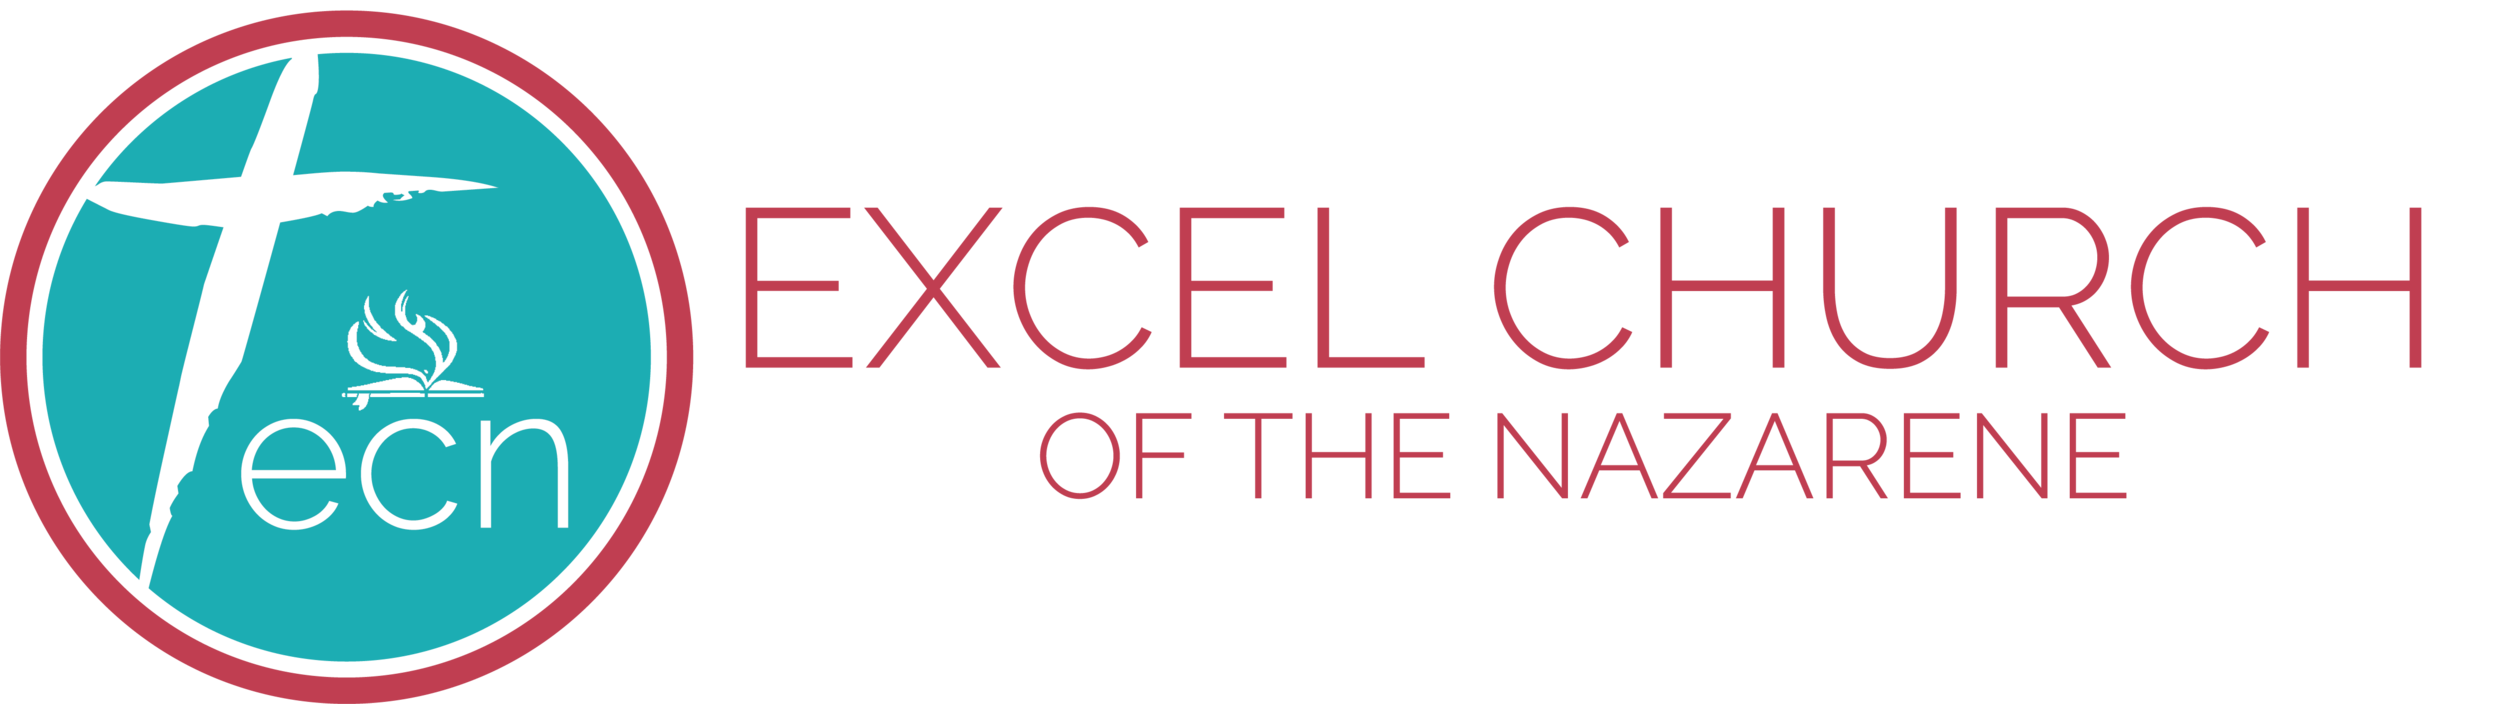 Excel Church Of The Nazarene